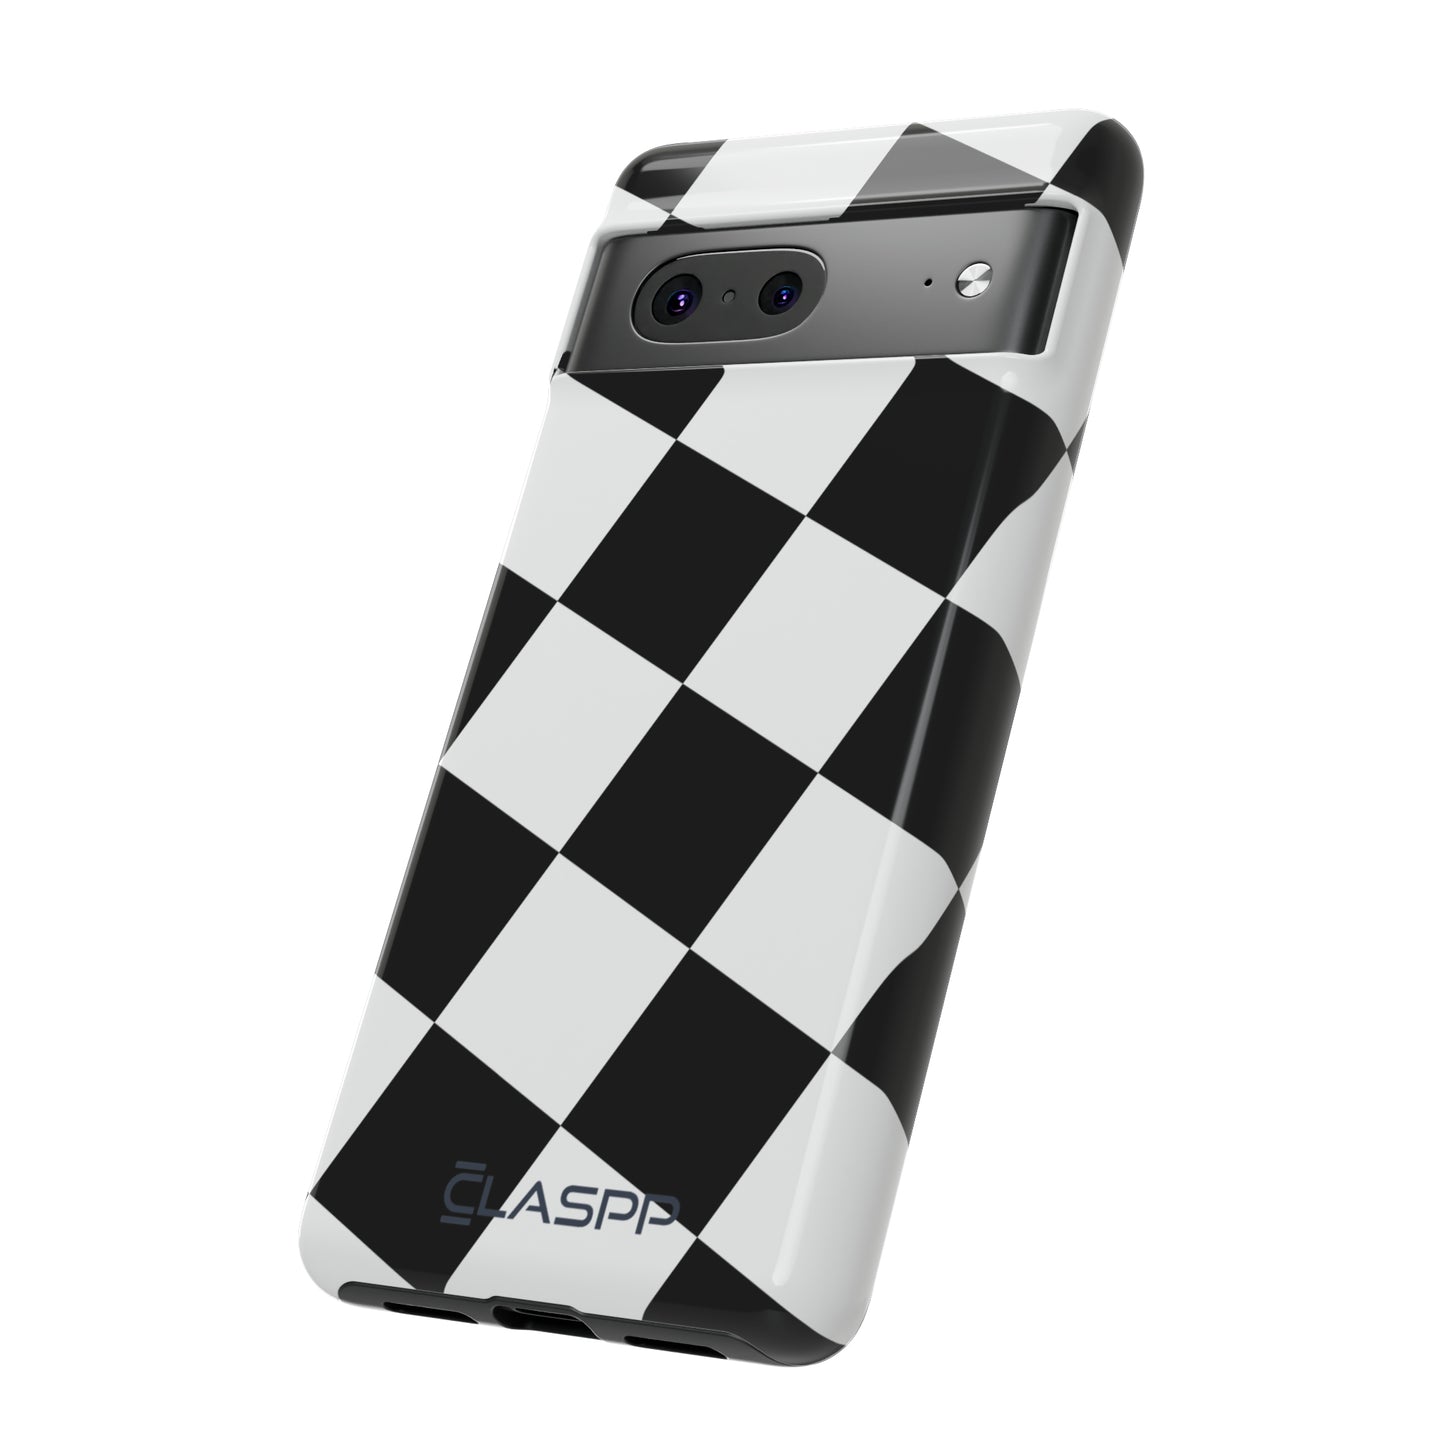 Slanted Checkers | Hardshell Dual Layer Phone Case